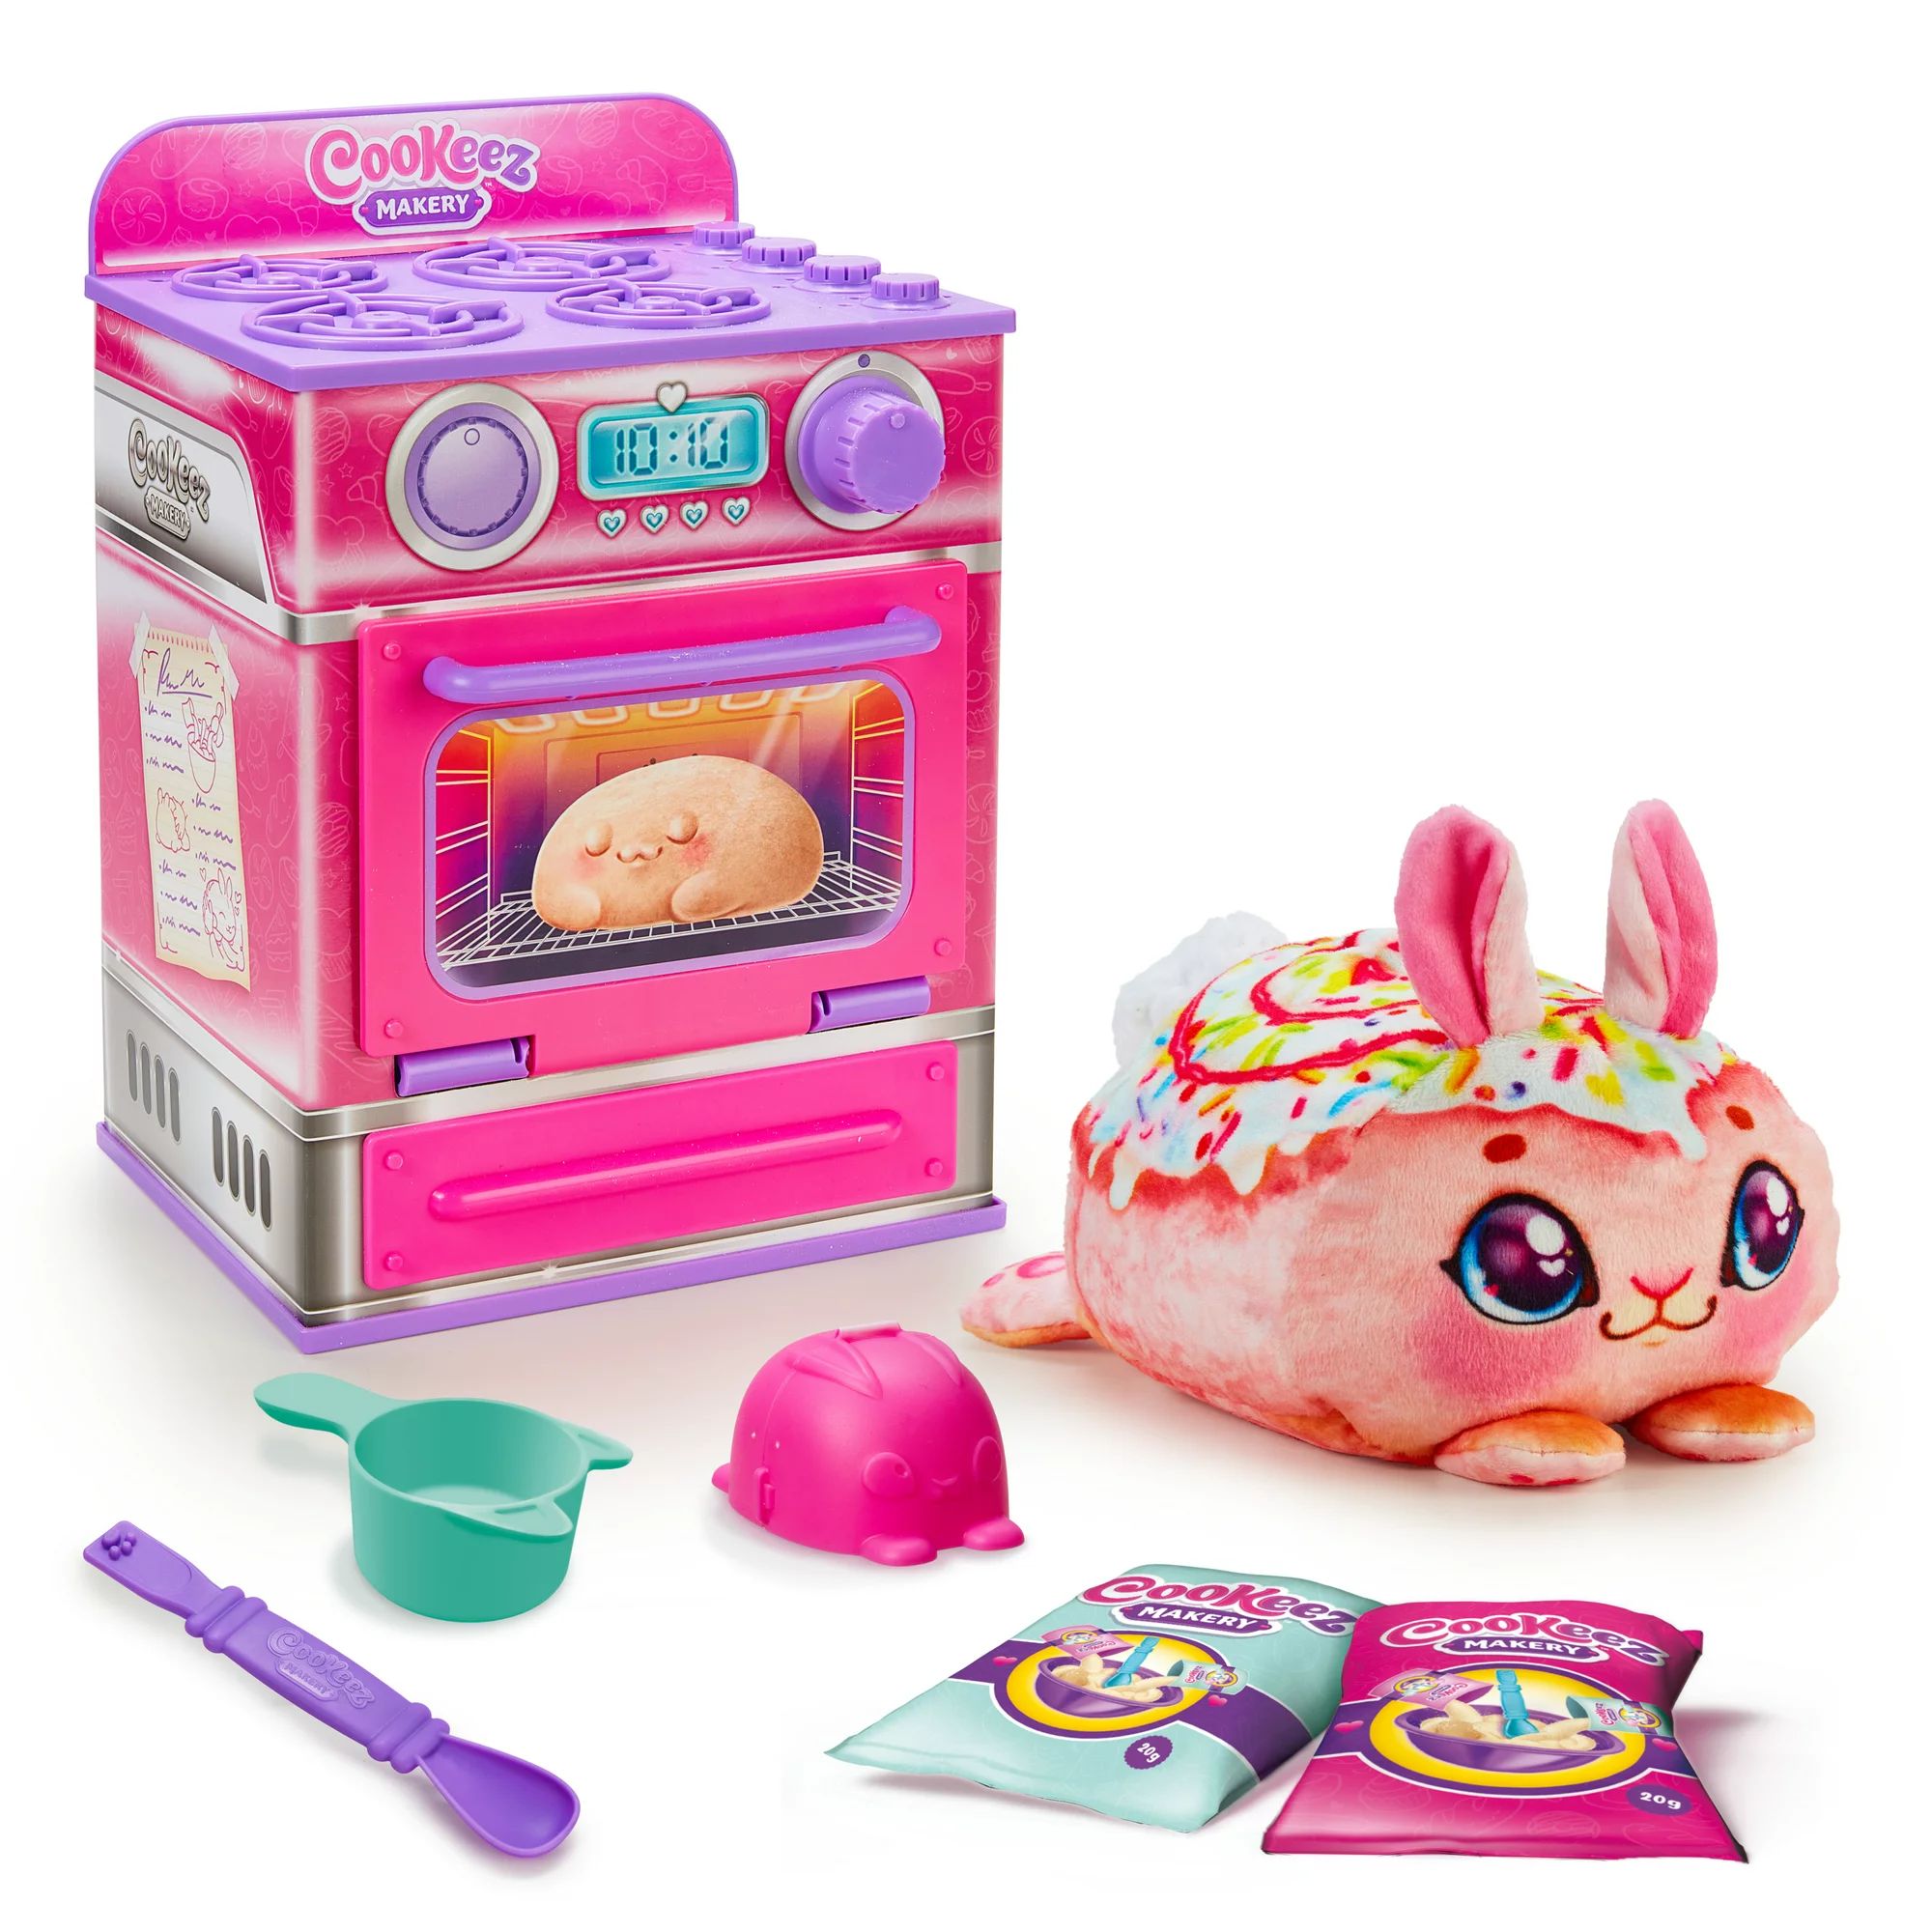 Cookeez Makery Cinnamon Treatz Pink Oven, Scented, Interactive Plush, Styles Vary, Ages 5+ - Walm... | Walmart (US)